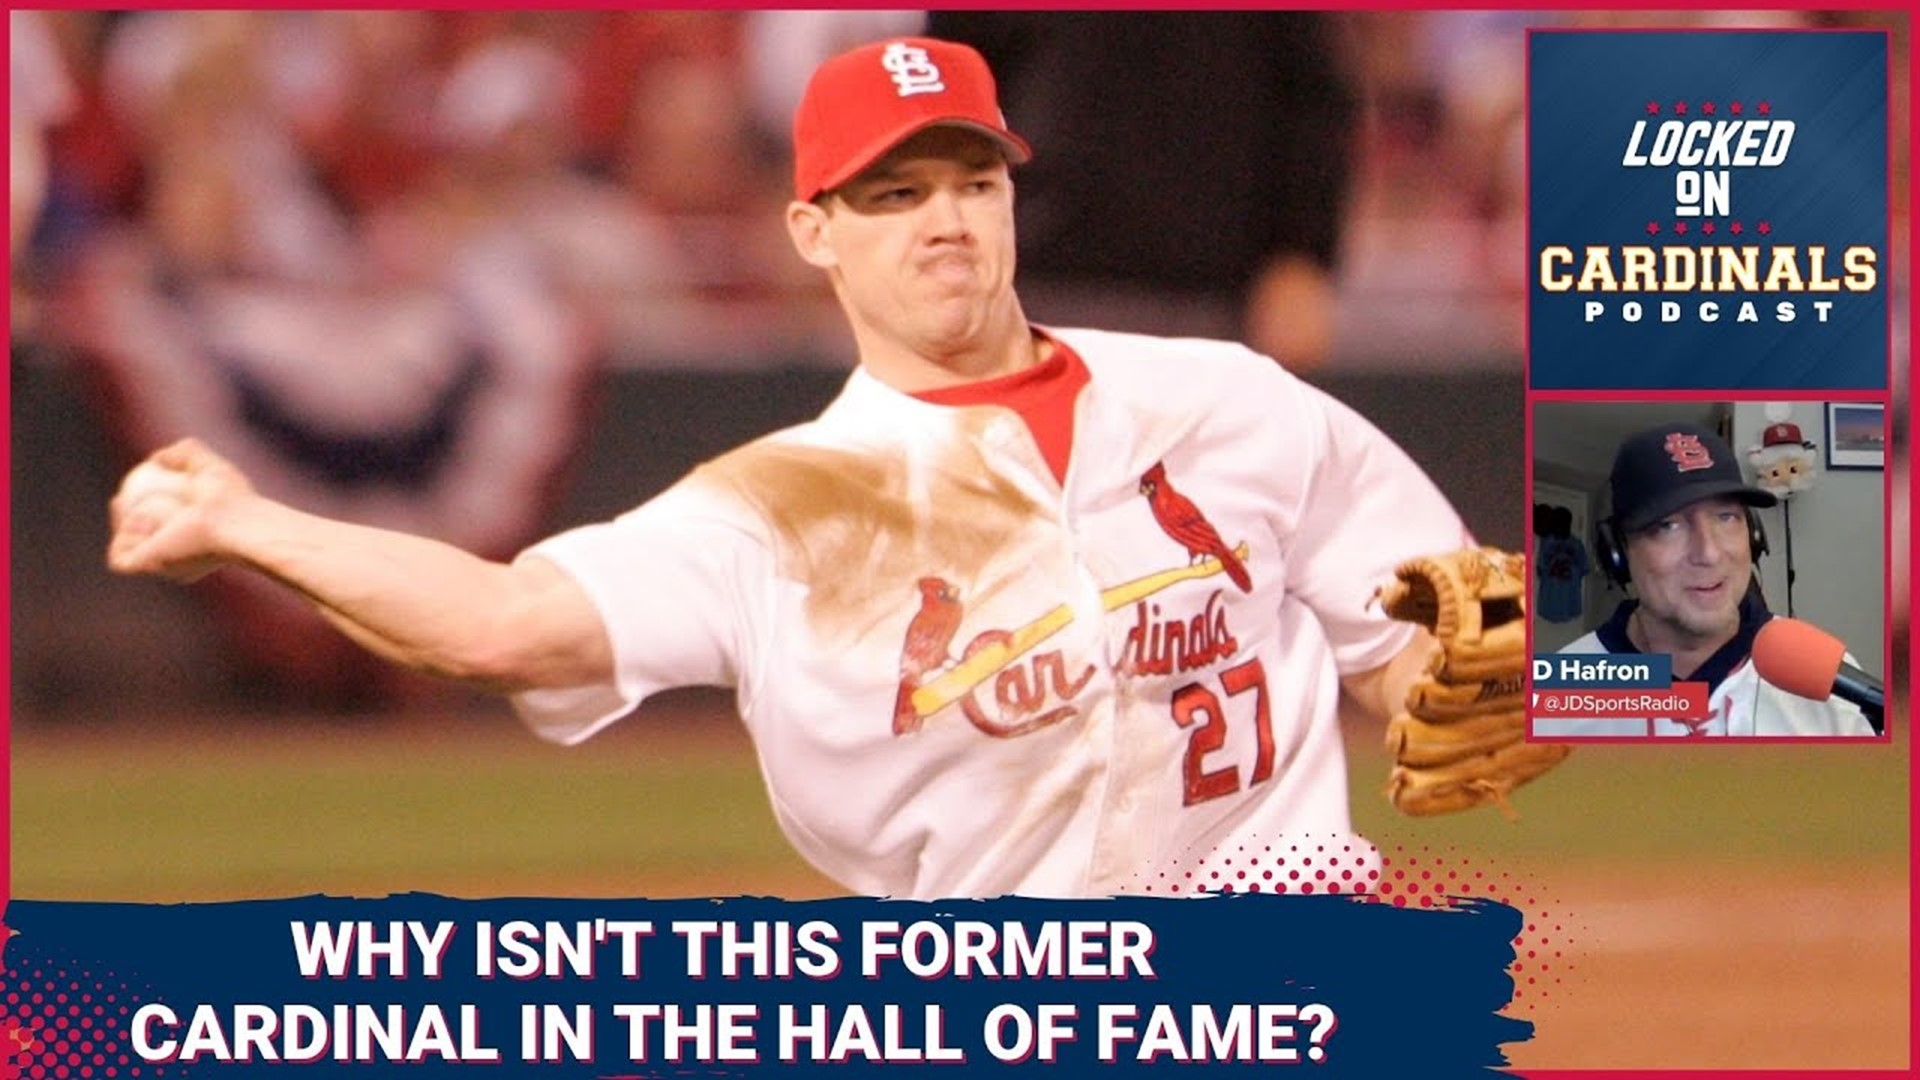 Scott Rolen got word that he has been elected into the Baseball Hall of Fame. Fred McGriff will also be enshrined with Rolen.